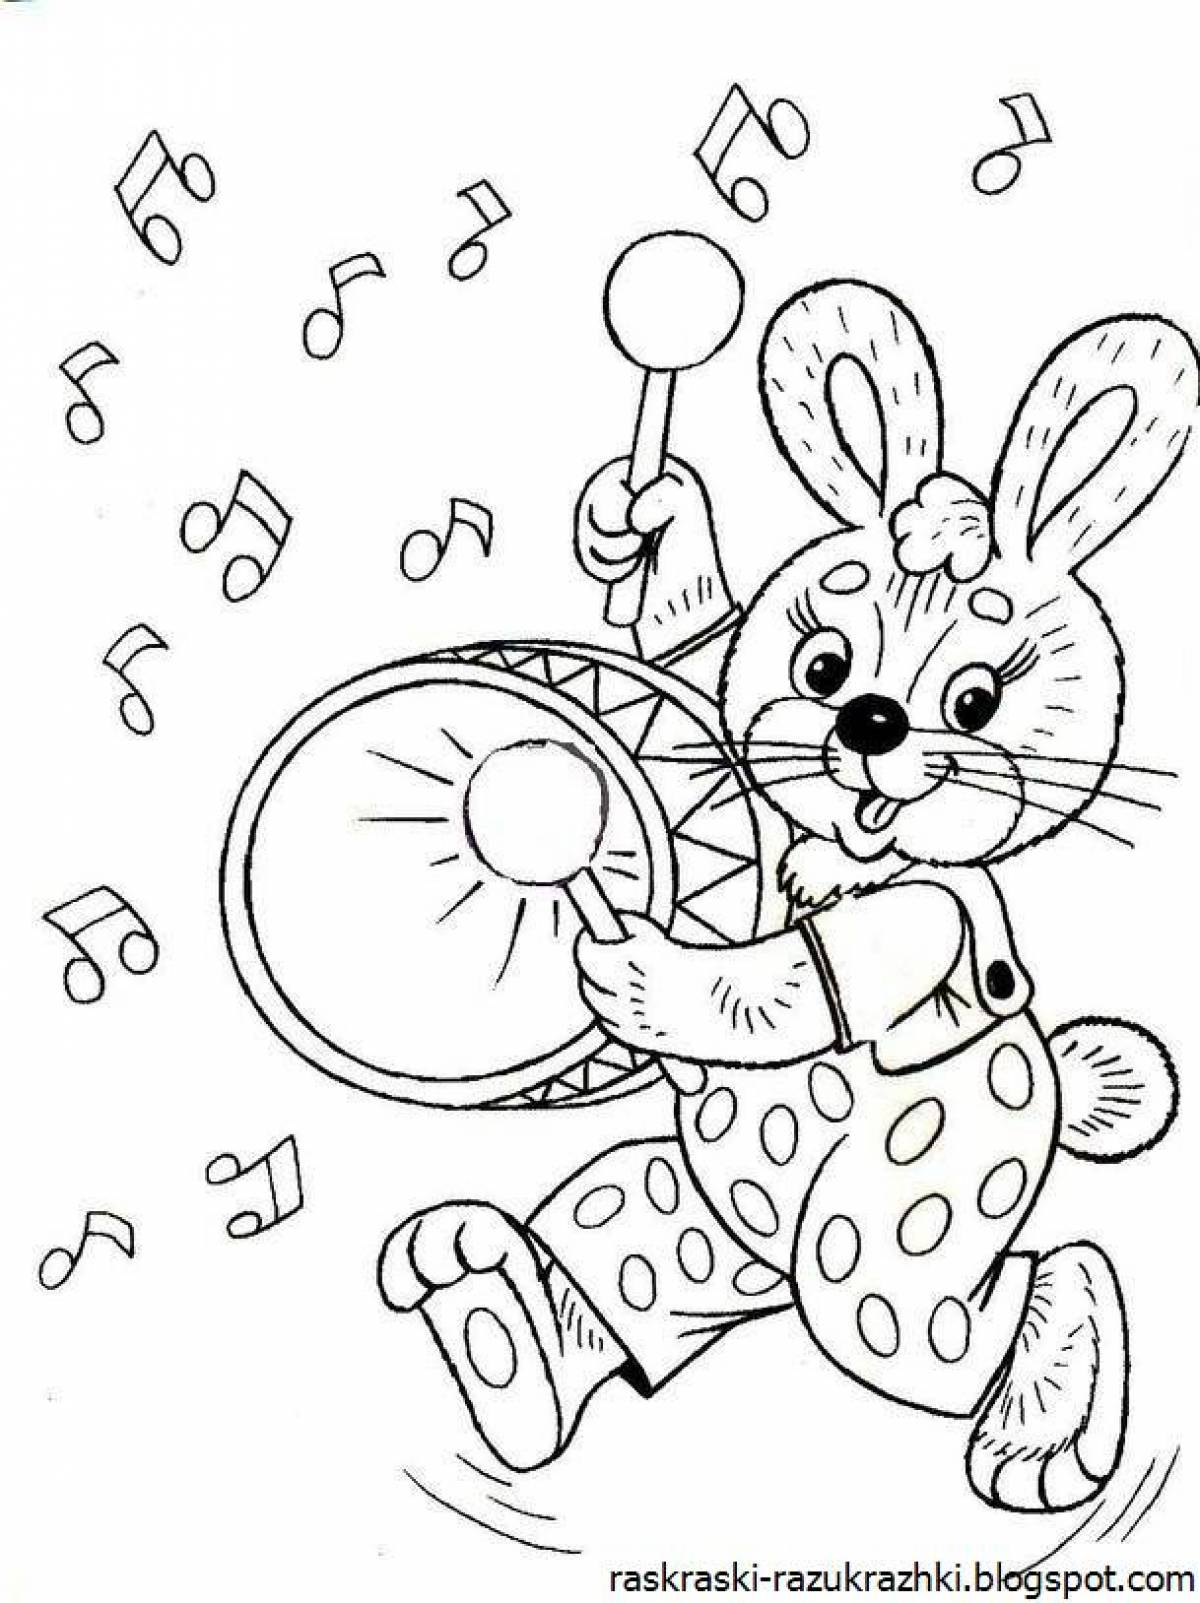 Playable rabbit coloring game